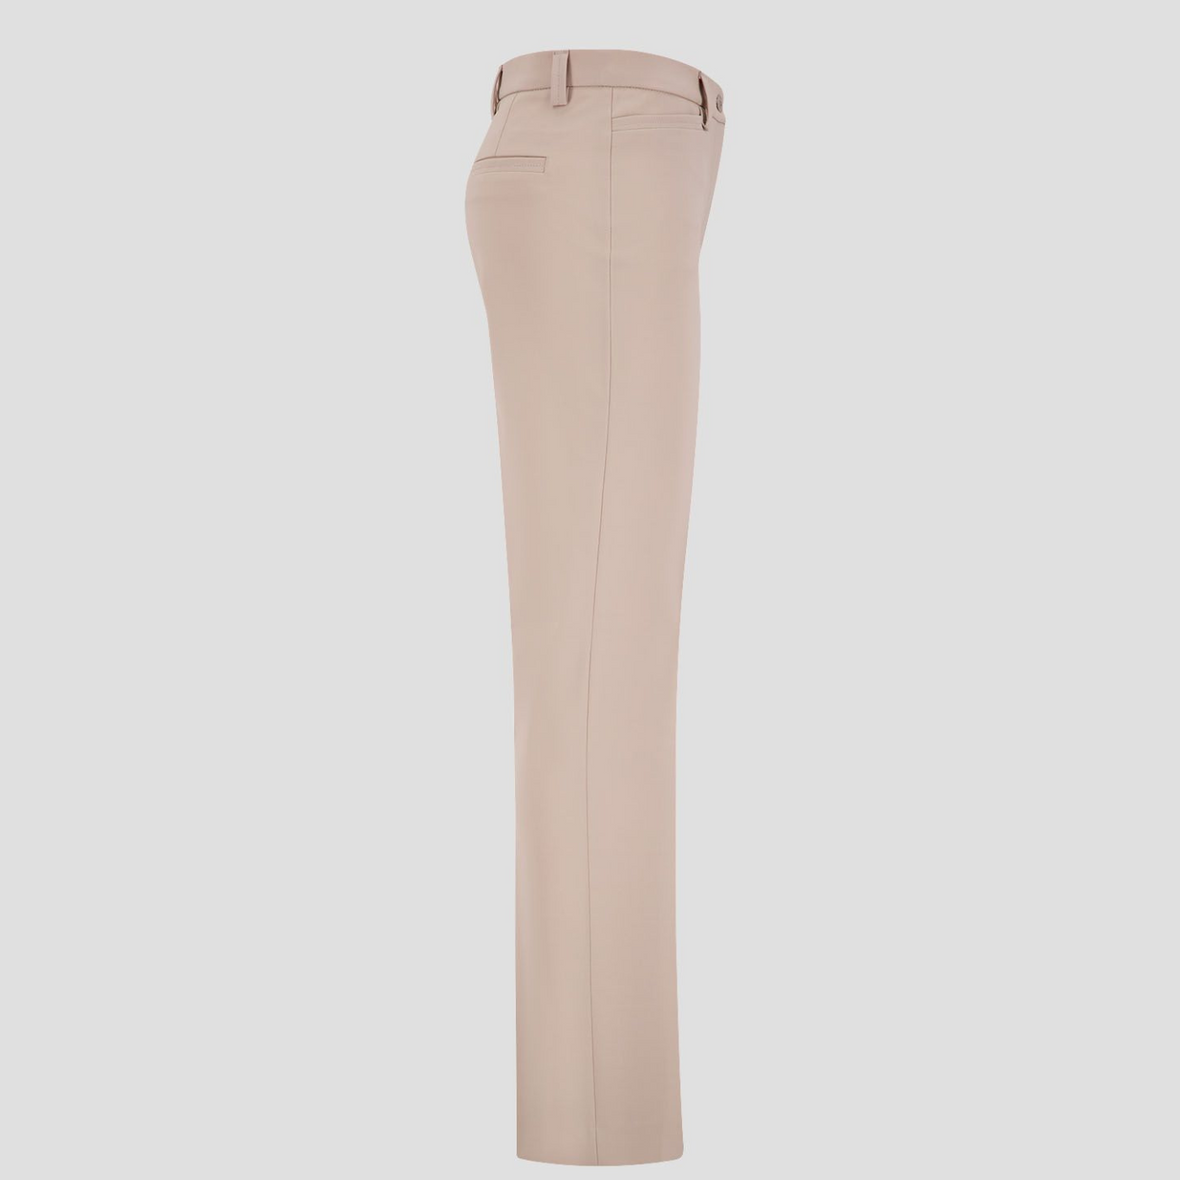 side profile of a product image of a kayla trouser. The slightly tapered straight leg design gives a flattering feminine silhouette while a front zip, button fastening and belt loops enhance both the trousers versatility and style status.